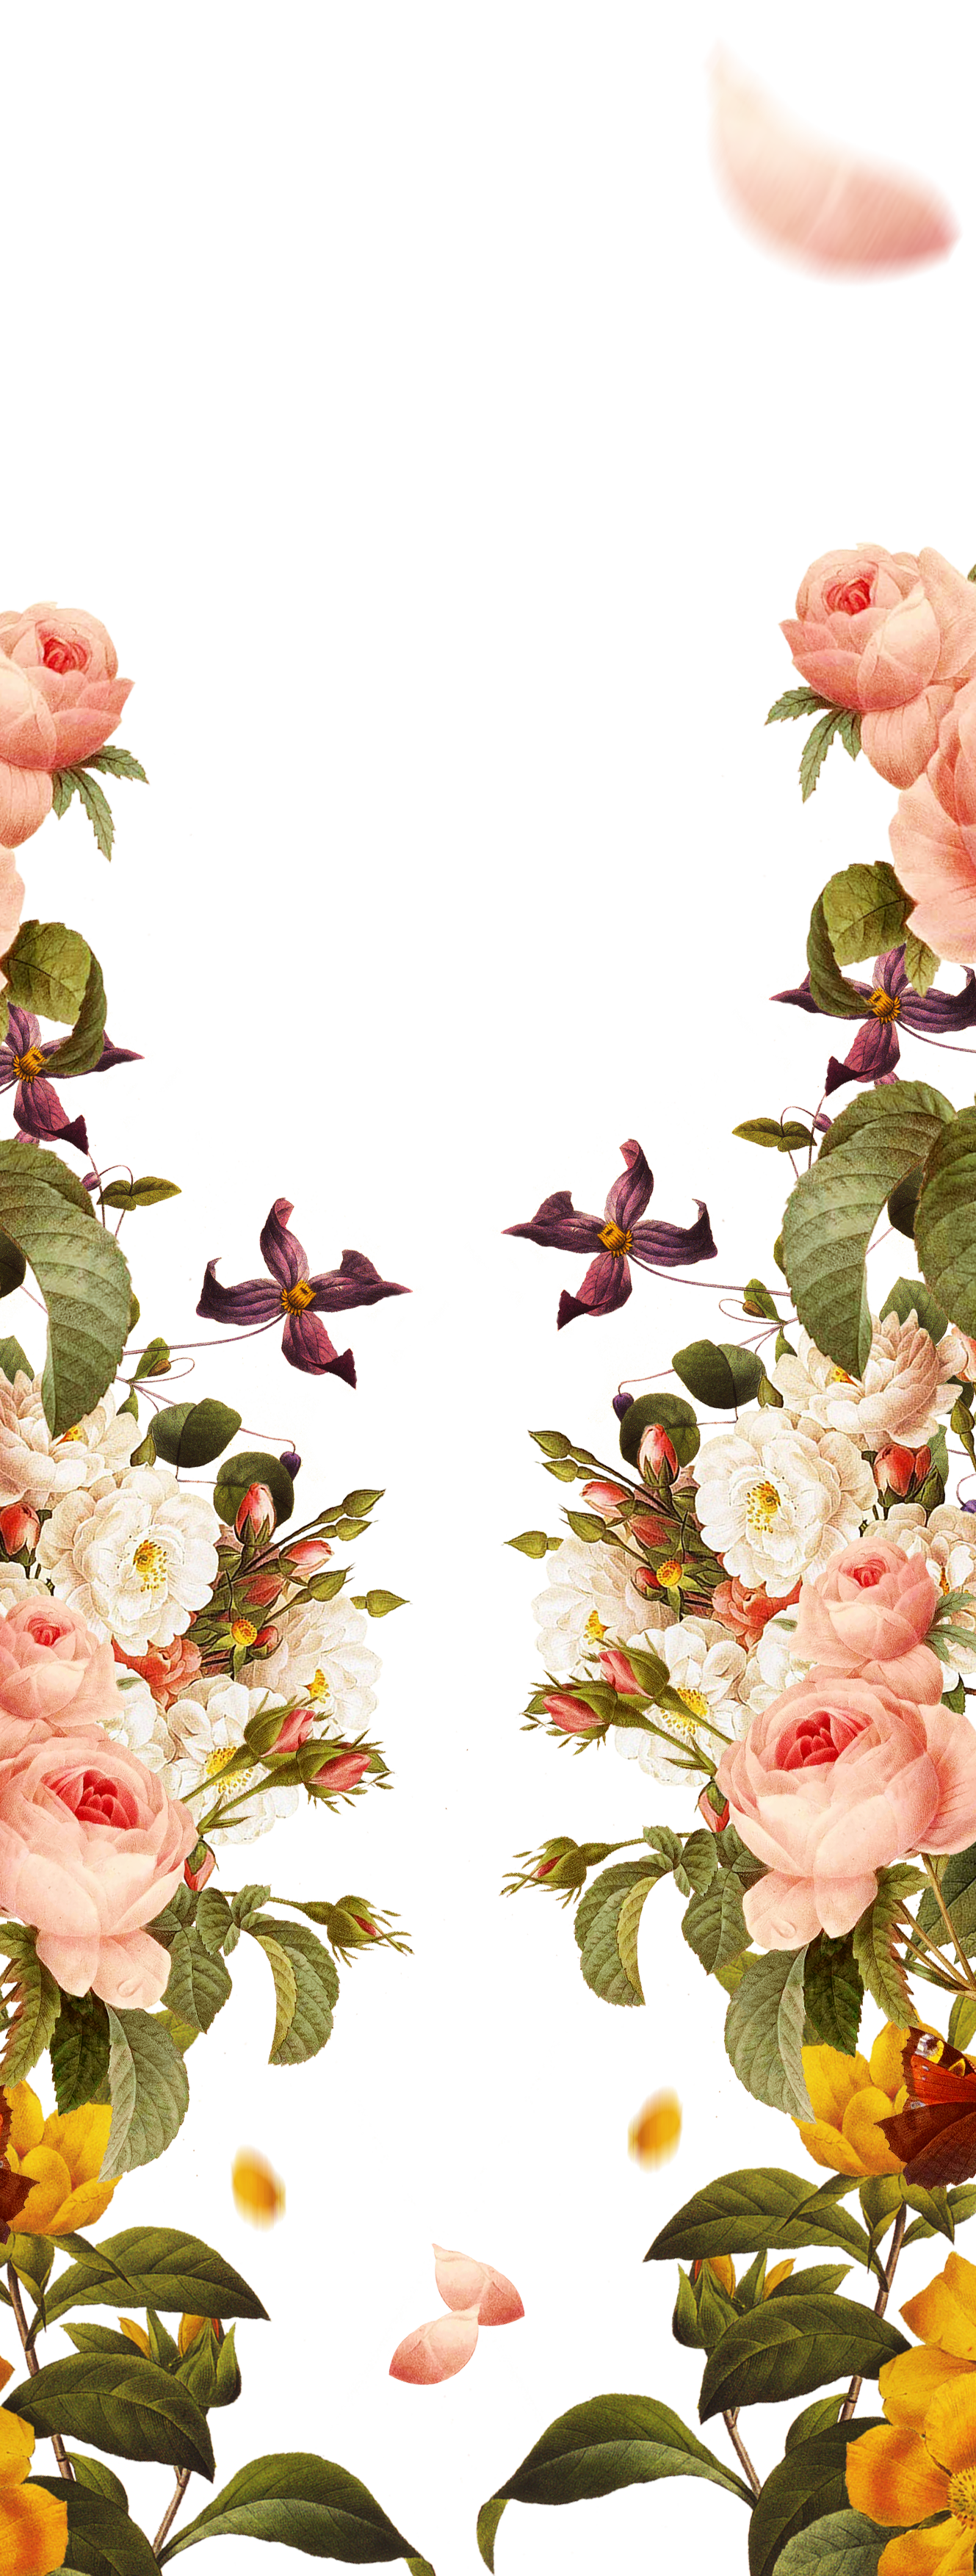 Pink Garden Painted Hand Roses Borders Flowers PNG Image